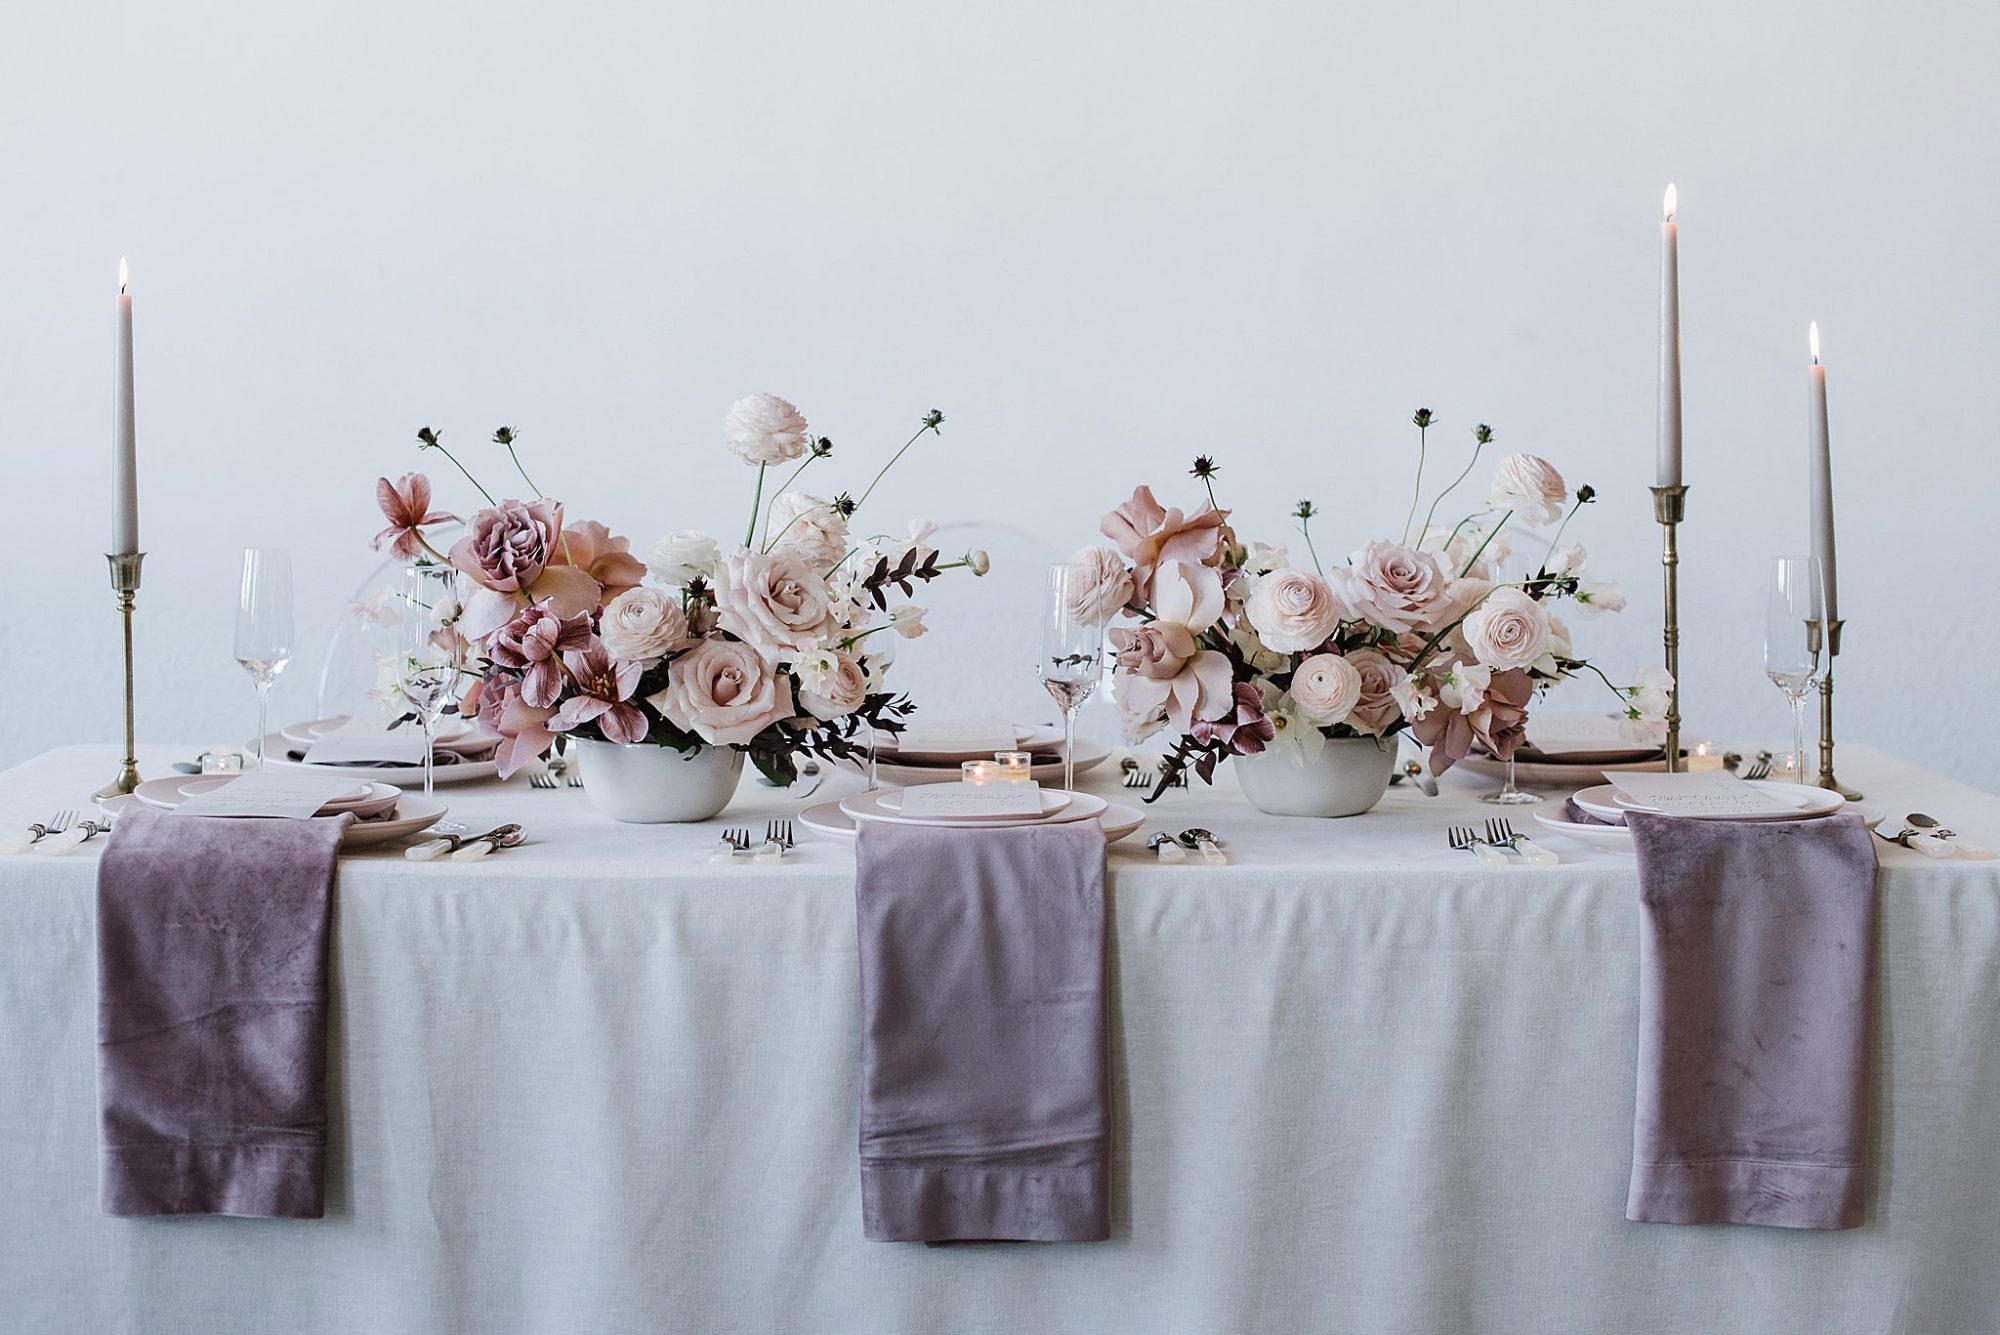 Purple wedding table details. There are blush flowers and white candlesticks.